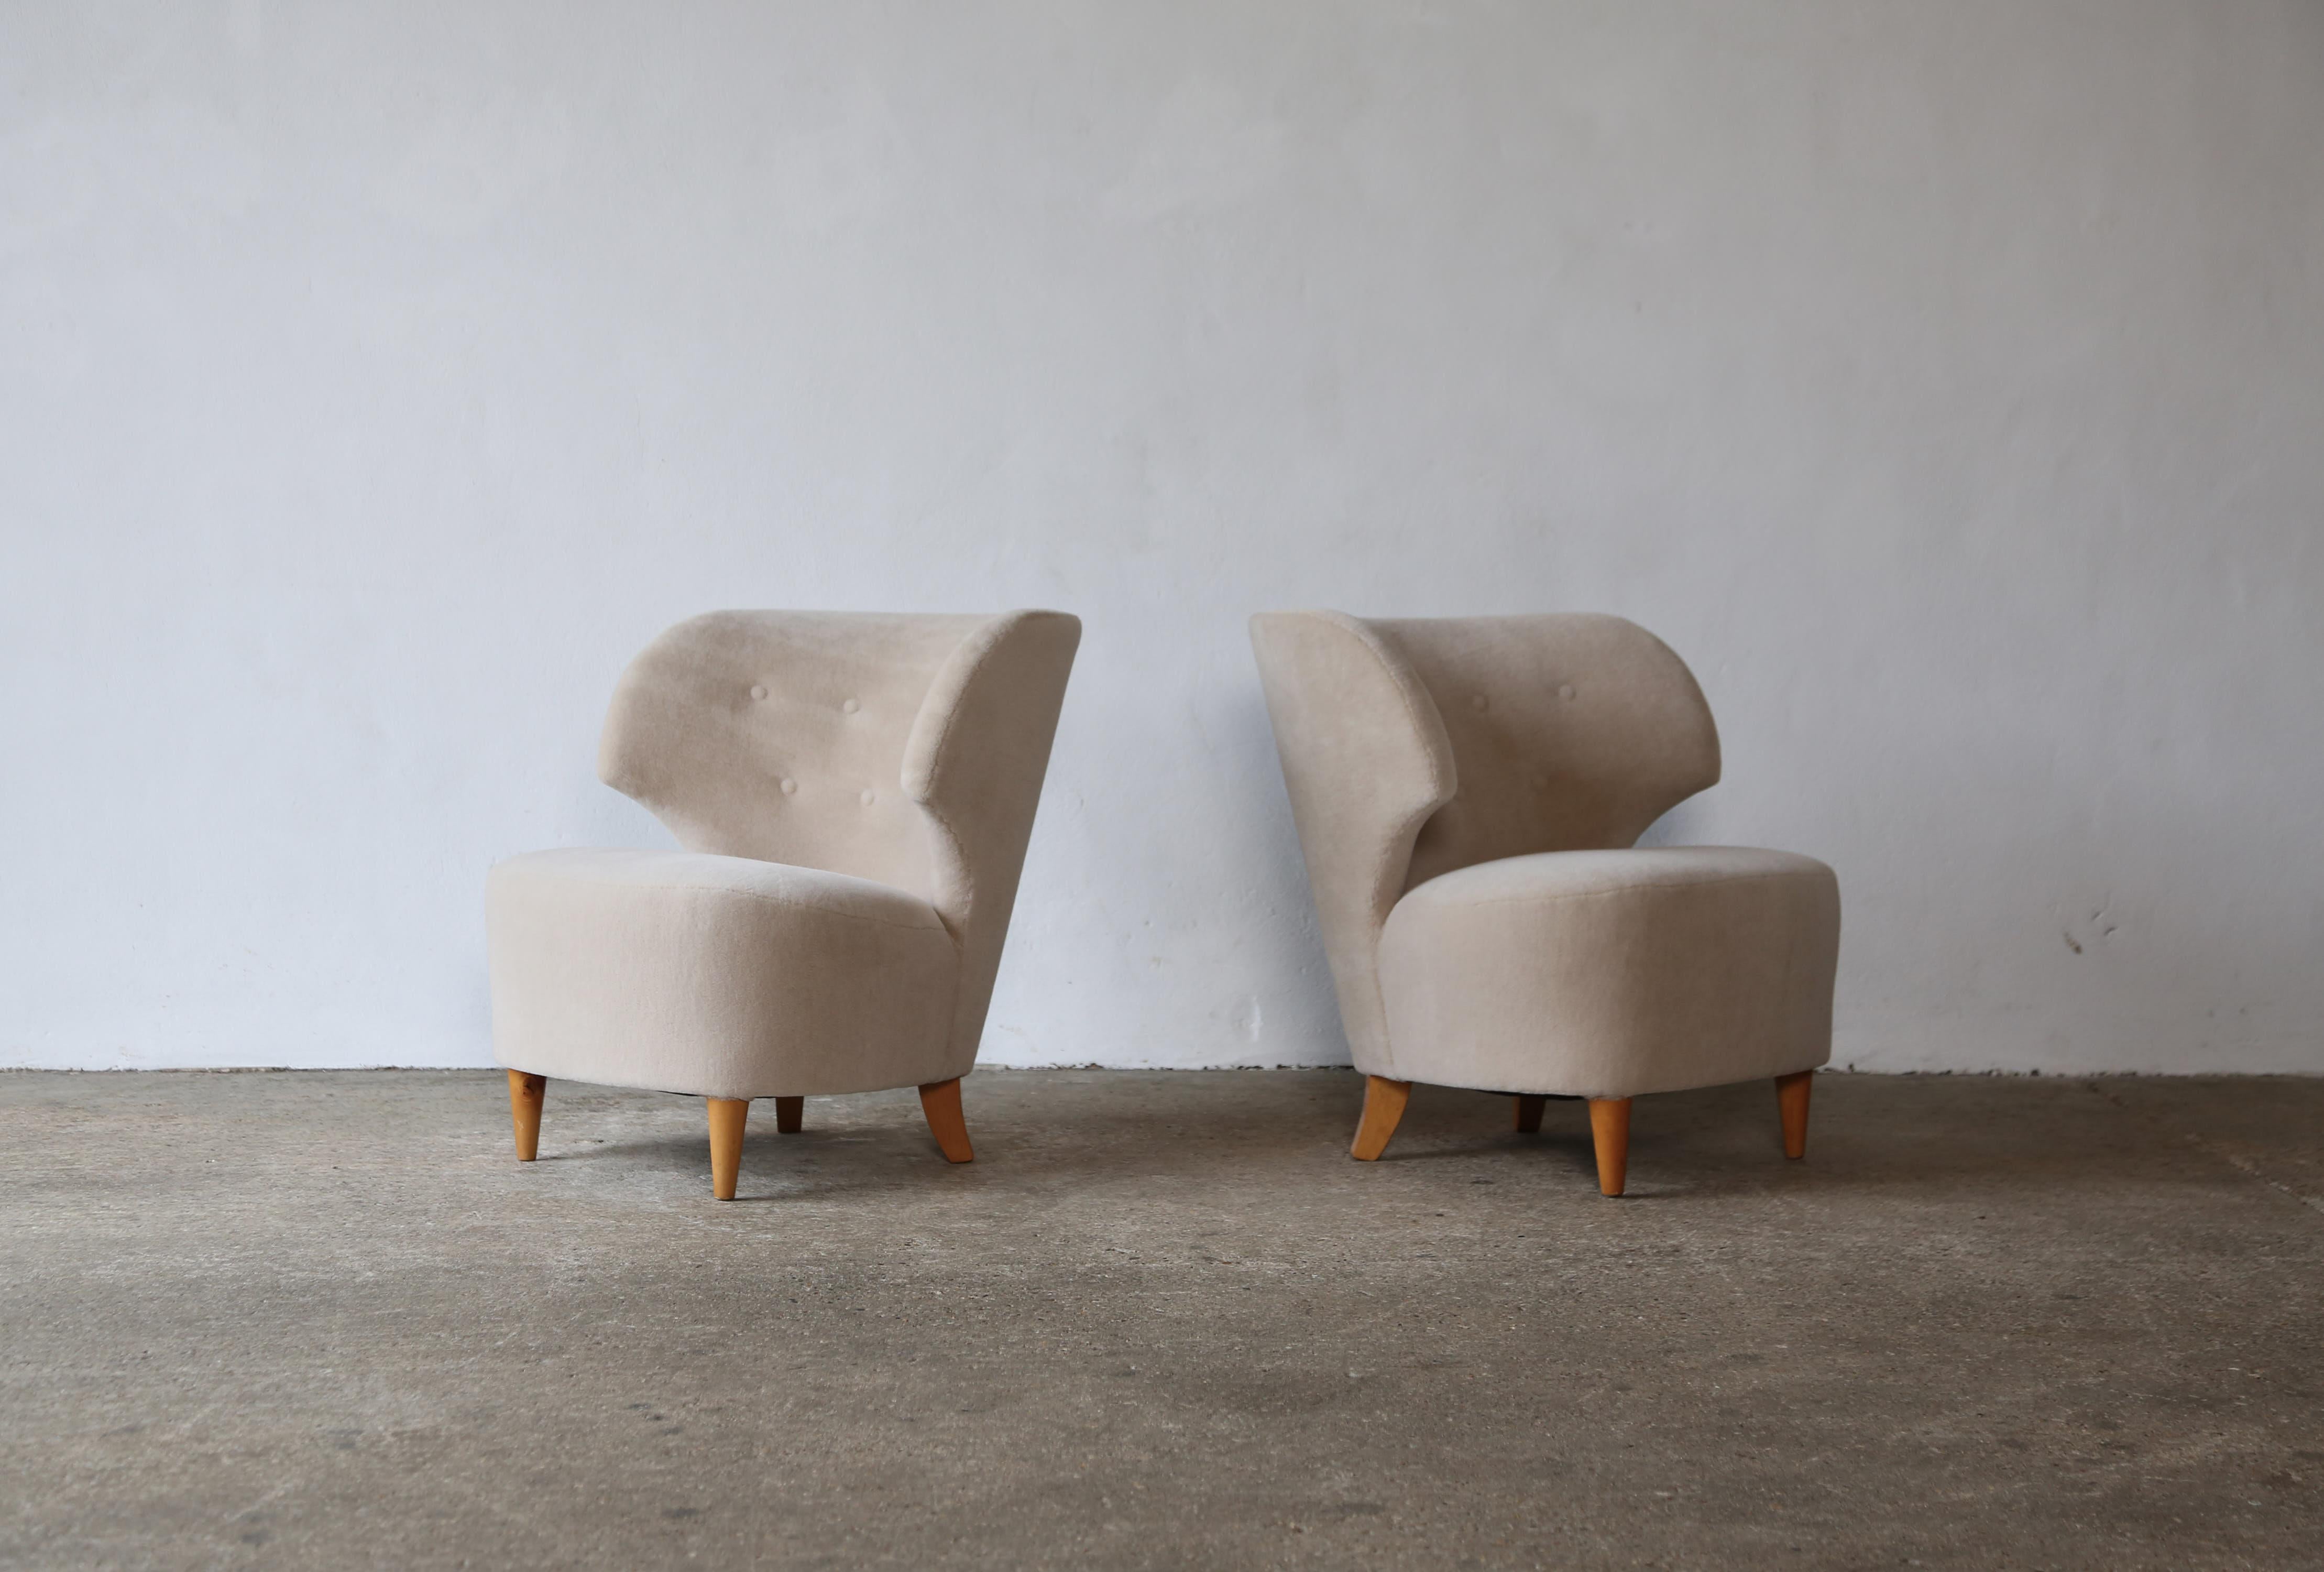 Pair of Carl-Johan Boman Chairs, Finland, 1940s, Newly Upholstered in Alpaca For Sale 4